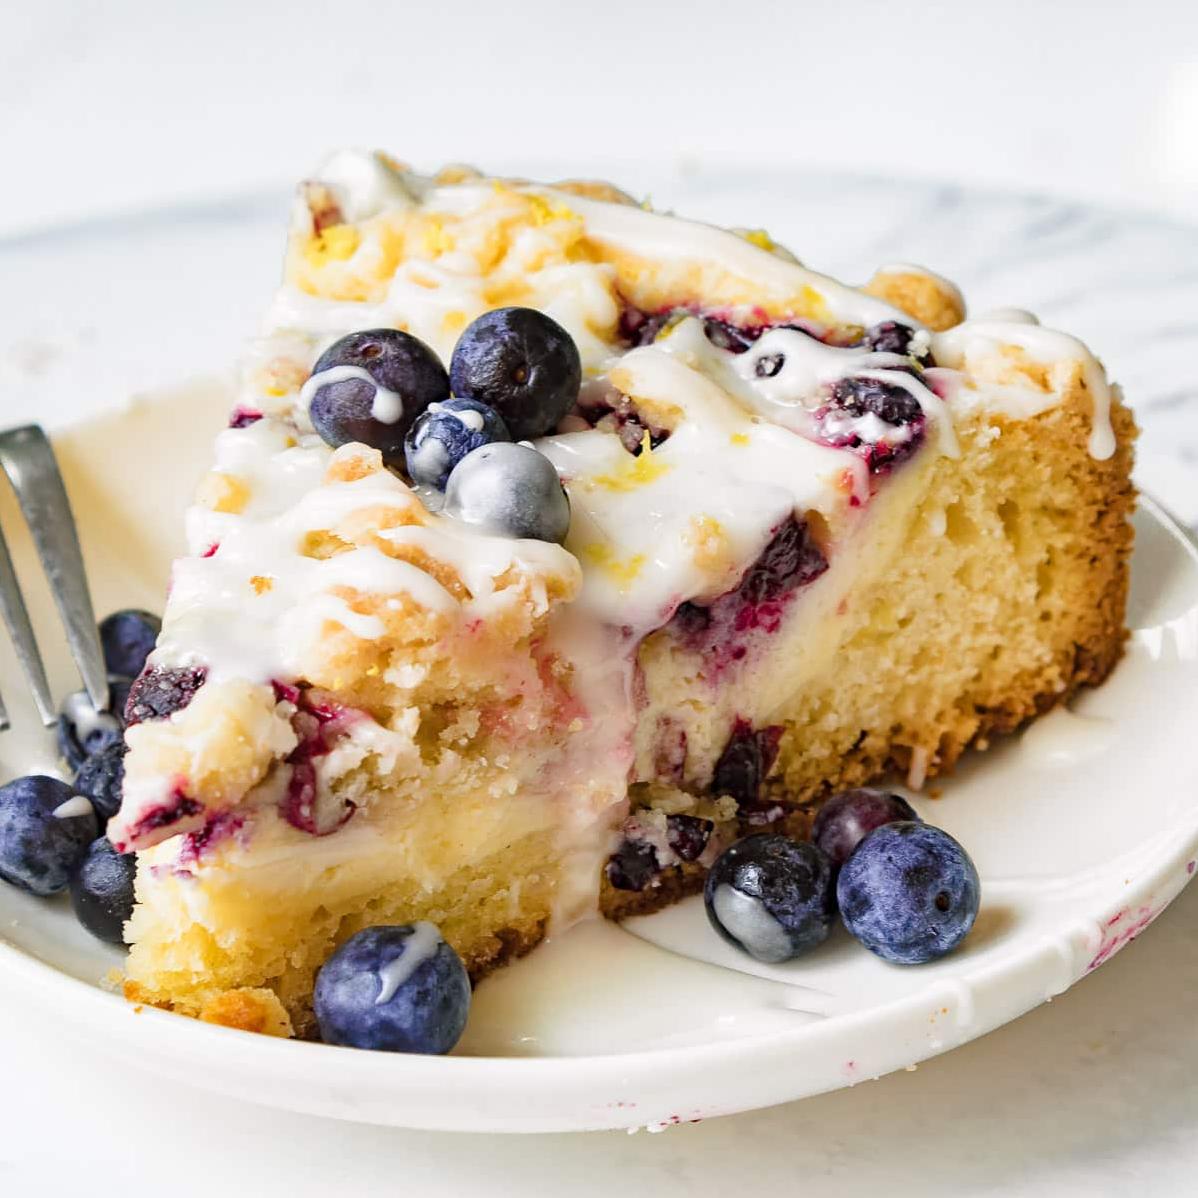  Creamy, rich, and bursting with blueberries